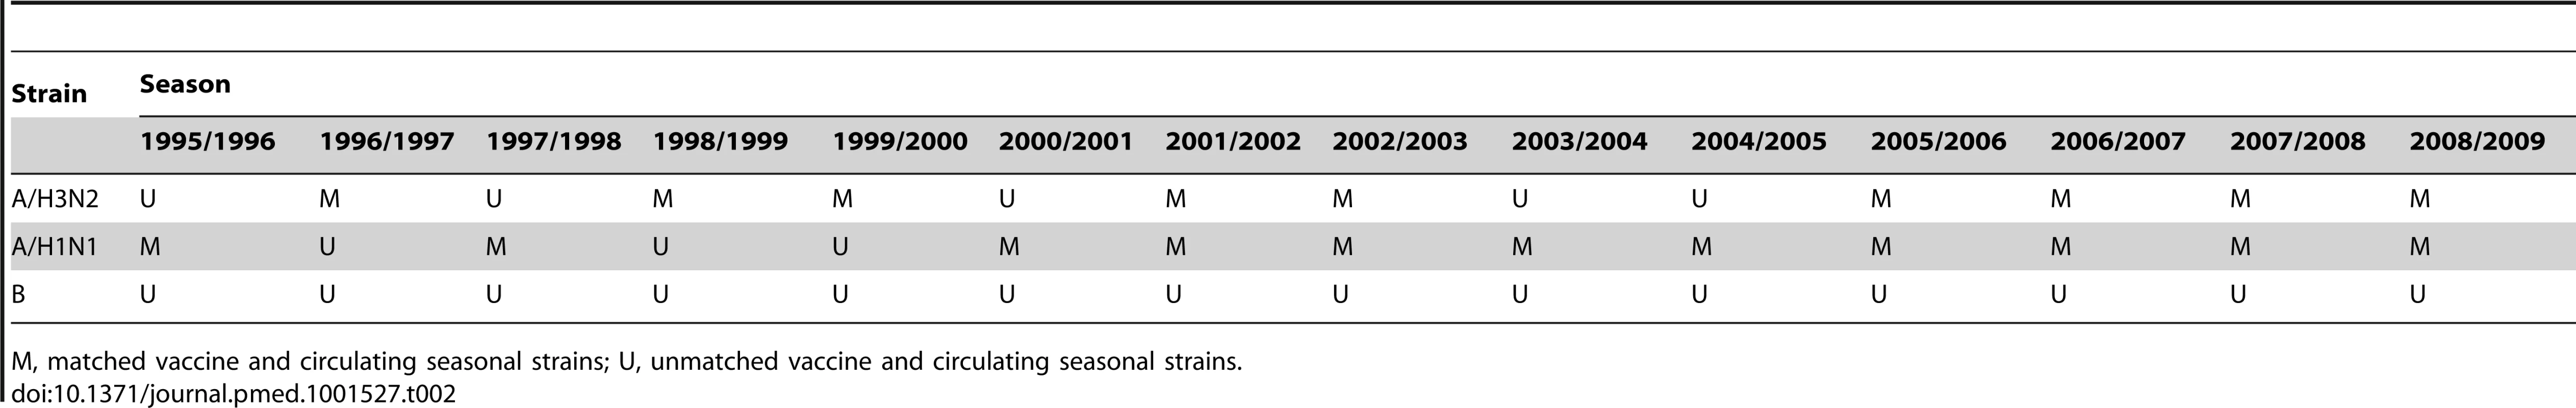 Match of the vaccine strains to the circulating seasonal strains during the period 1995/1996 to 2008/2009.